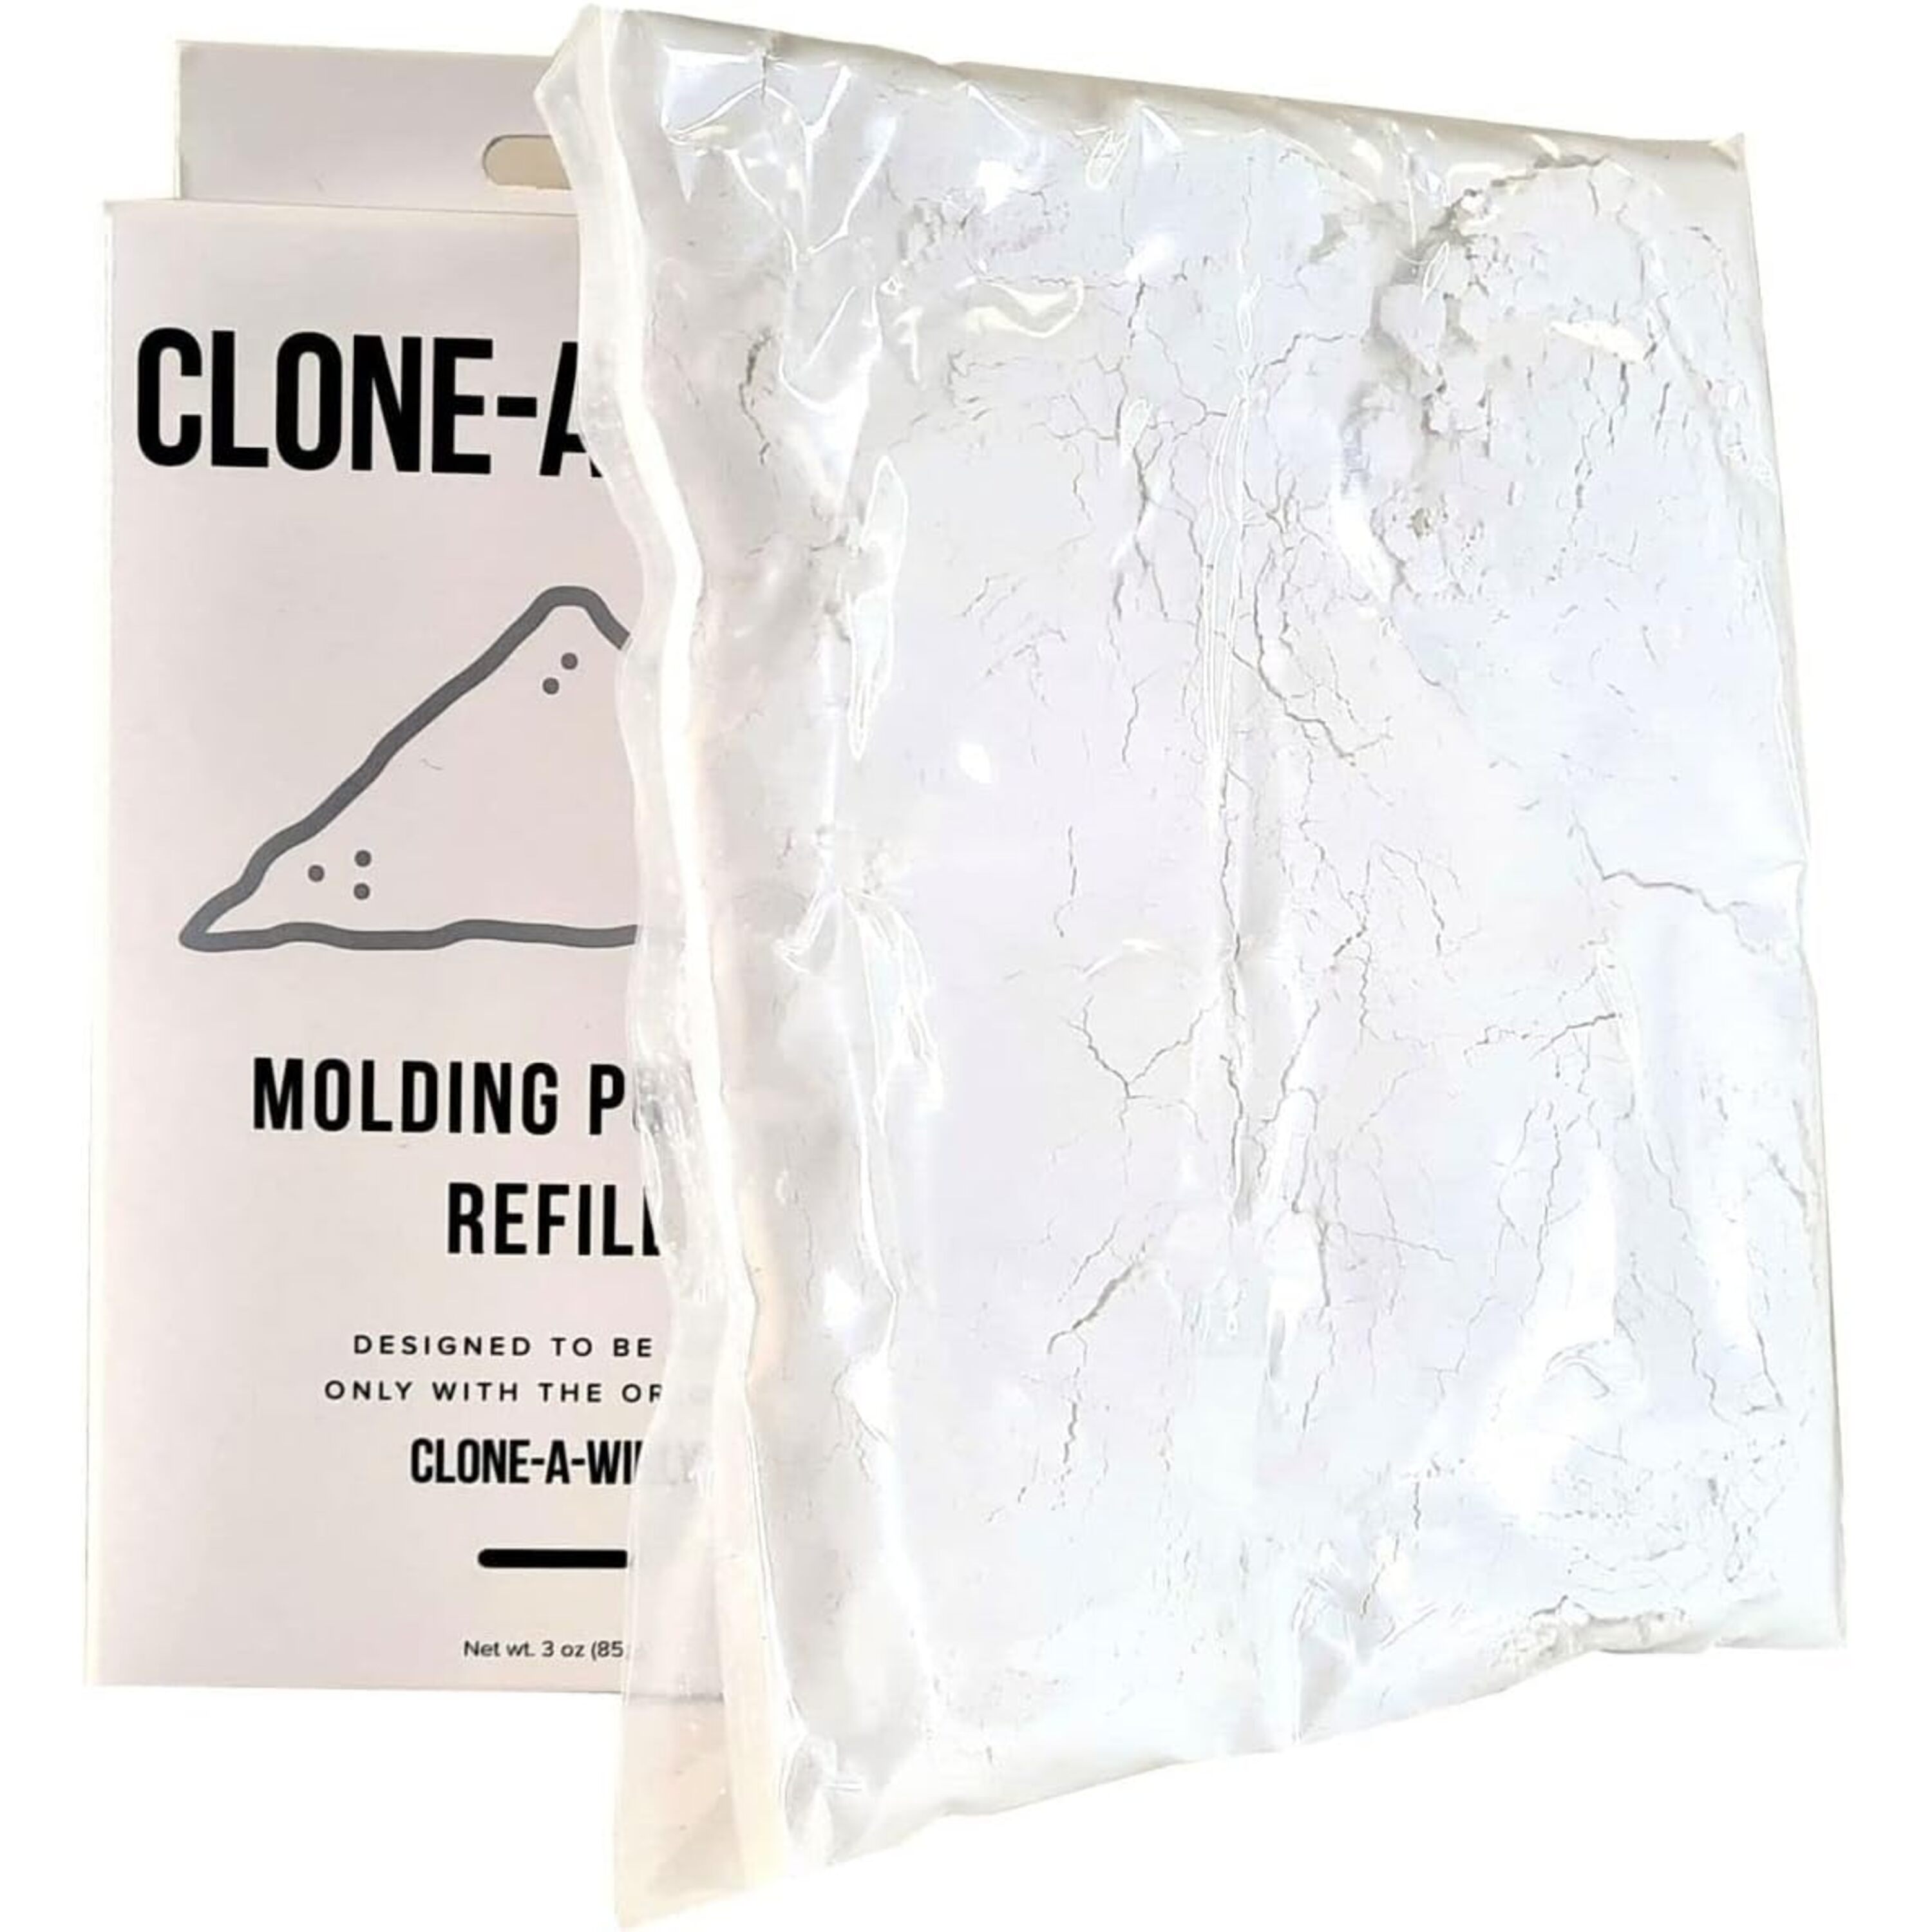 Clone-A-Willy on X: Stay connected while staying home! Use promo code  QUARANTWEENIE for 20% off our entire site + get an extra bag of molding  powder for FREE with any Clone-A-Willy Kit!